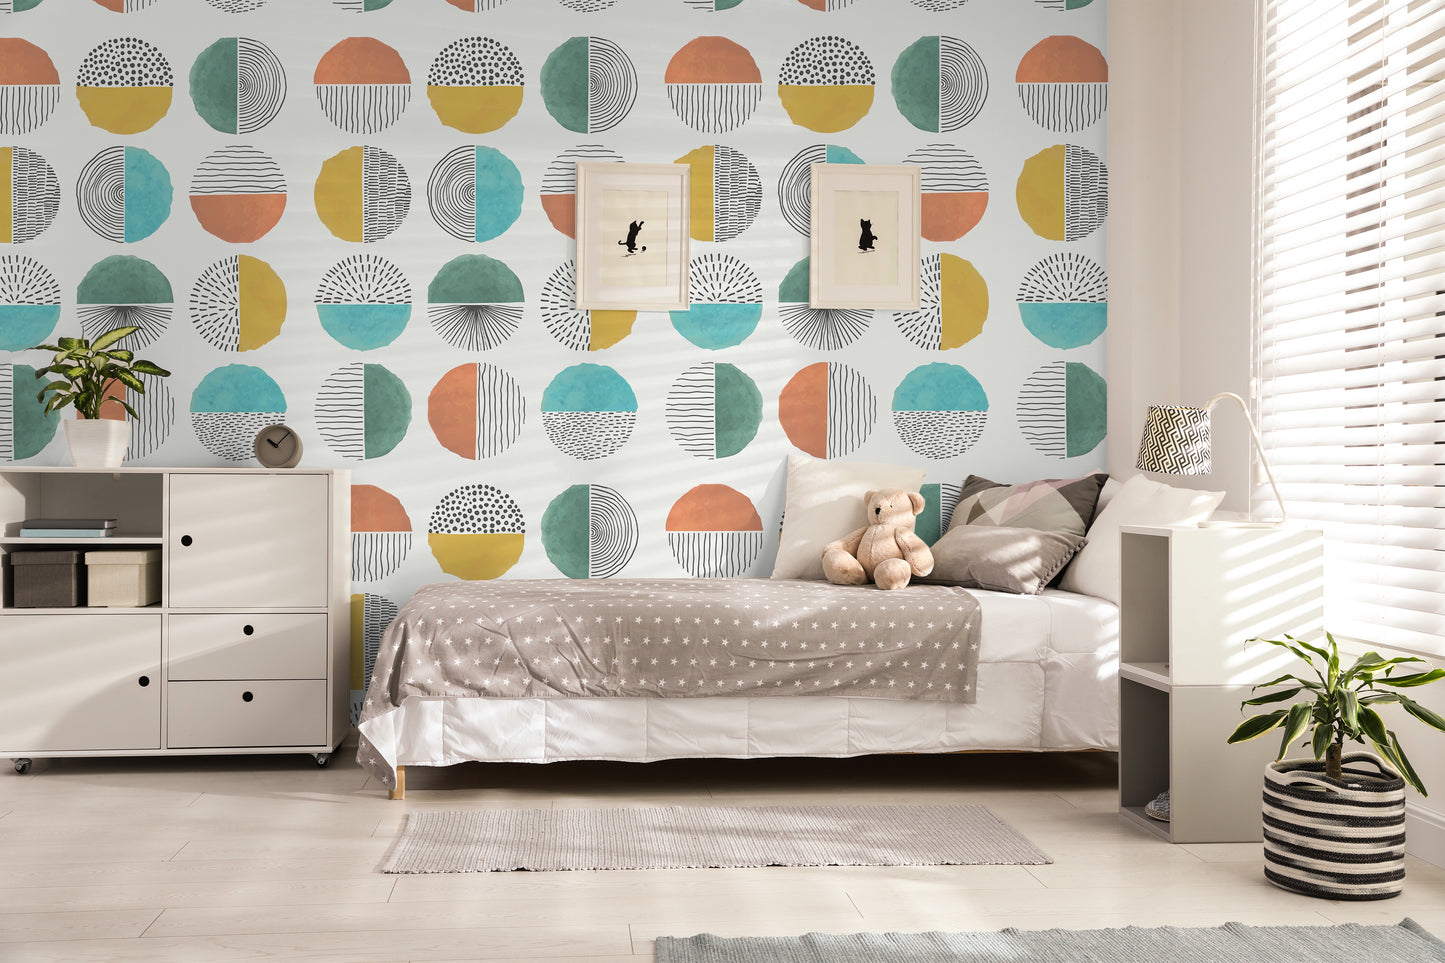 Easy removable peel and stick wallpaper with Colorful circles in half watercolor half black and white textures on the wall in a child's bedroom